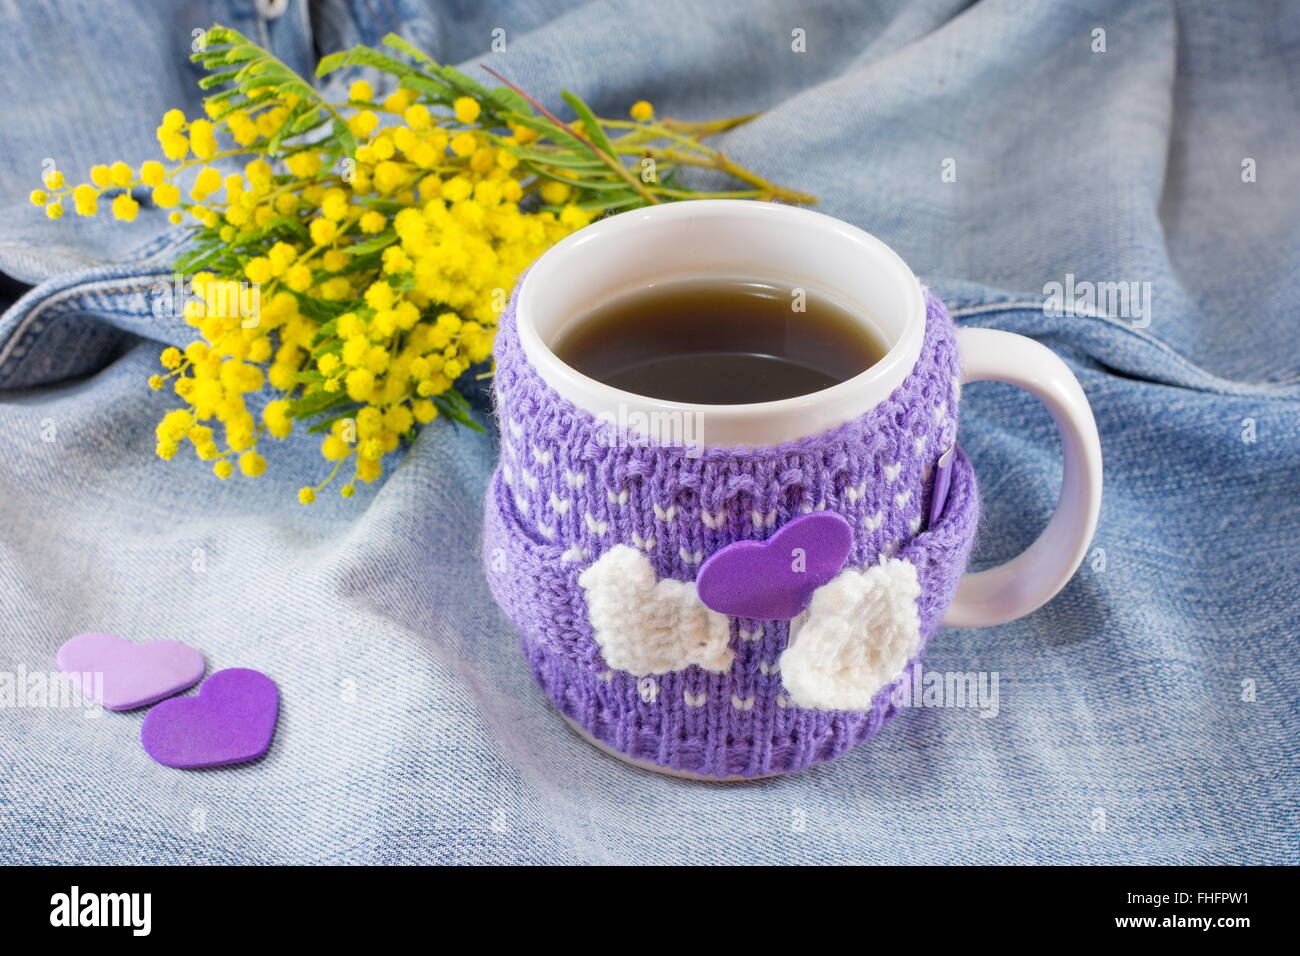 Winter cup of tea and mimosa flowers on blue denim background Stock Photo